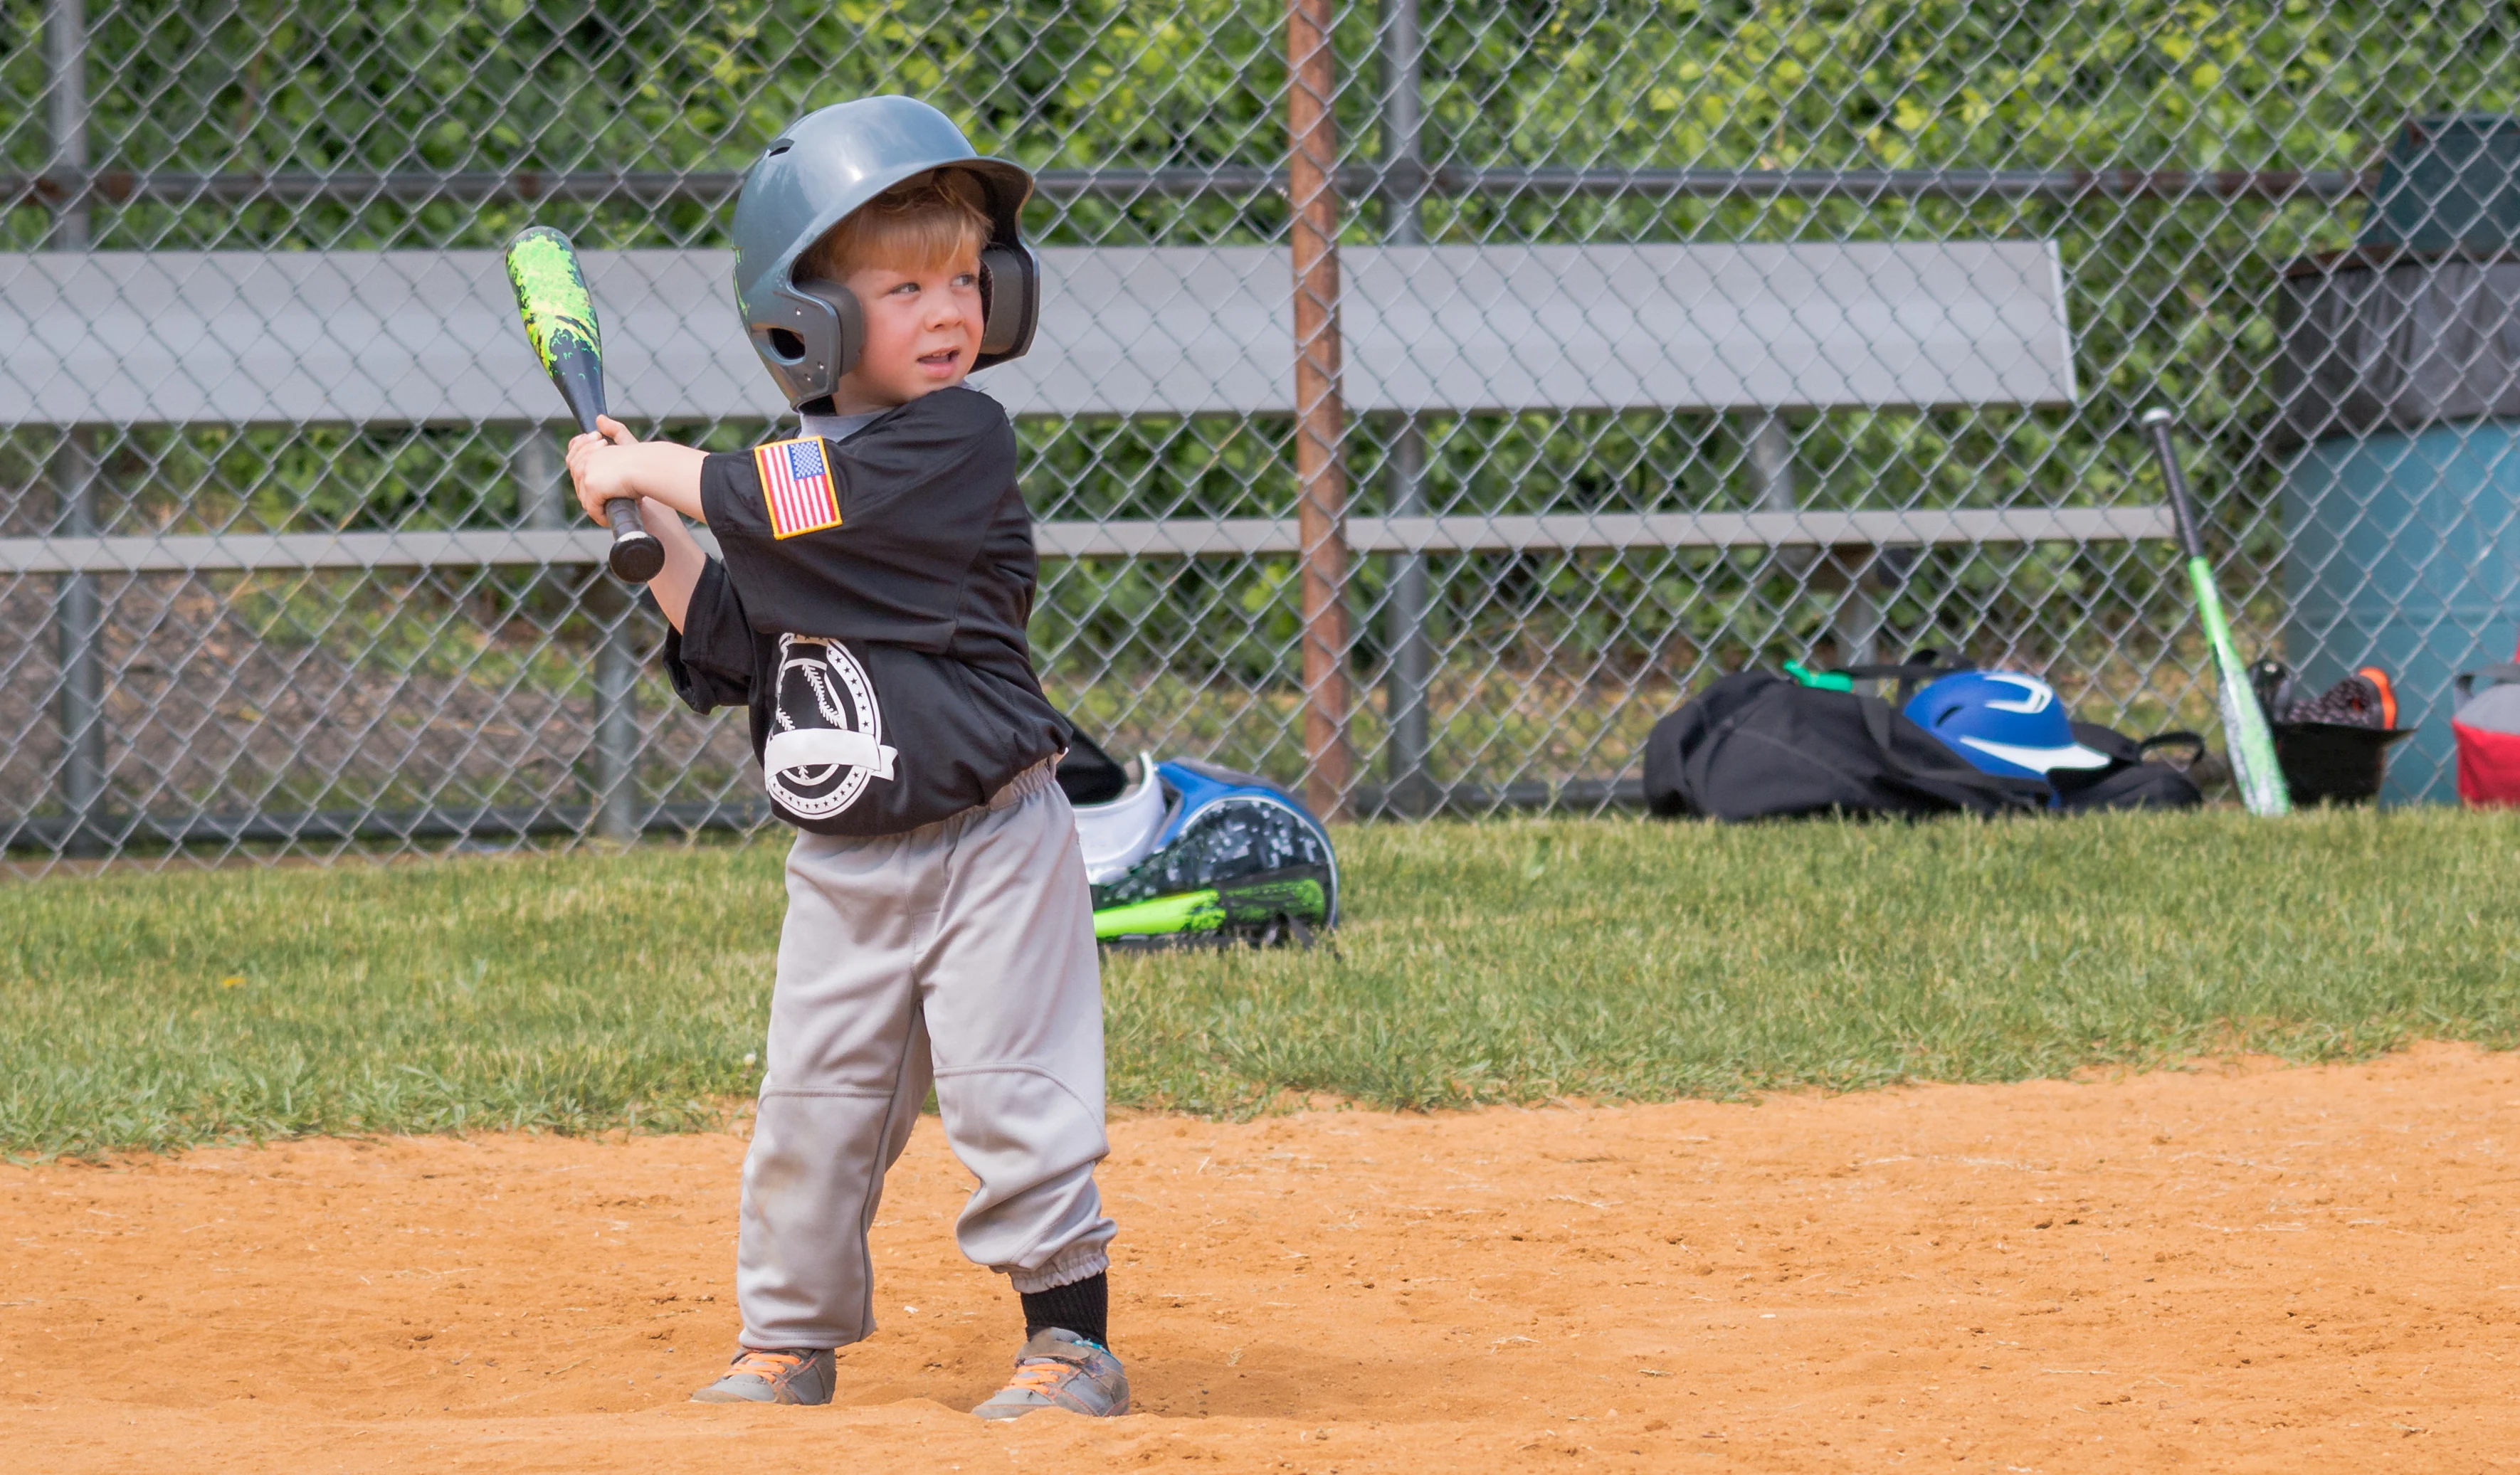 a young baseball player getting ready to hit the ball